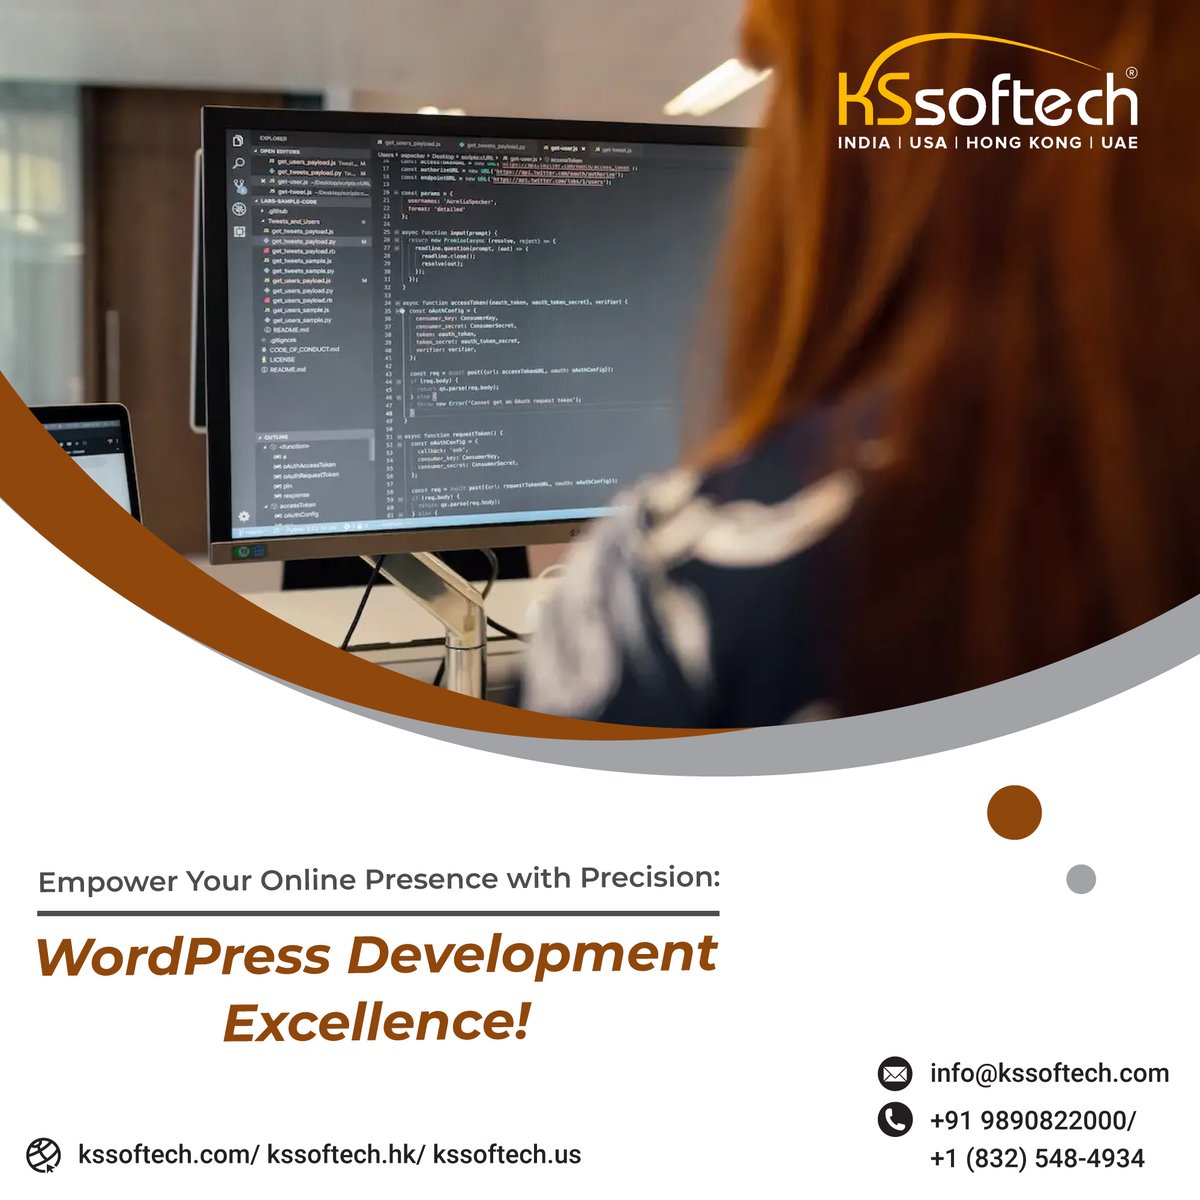 Elevate your online presence with us at KS Softech!
We specialize in crafting bespoke WordPress solutions tailored to your needs. Experience precision in design, seamless functionality, expert guidance, and future-proof solutions.
bit.ly/472VAzc
#wordpressdevelopment